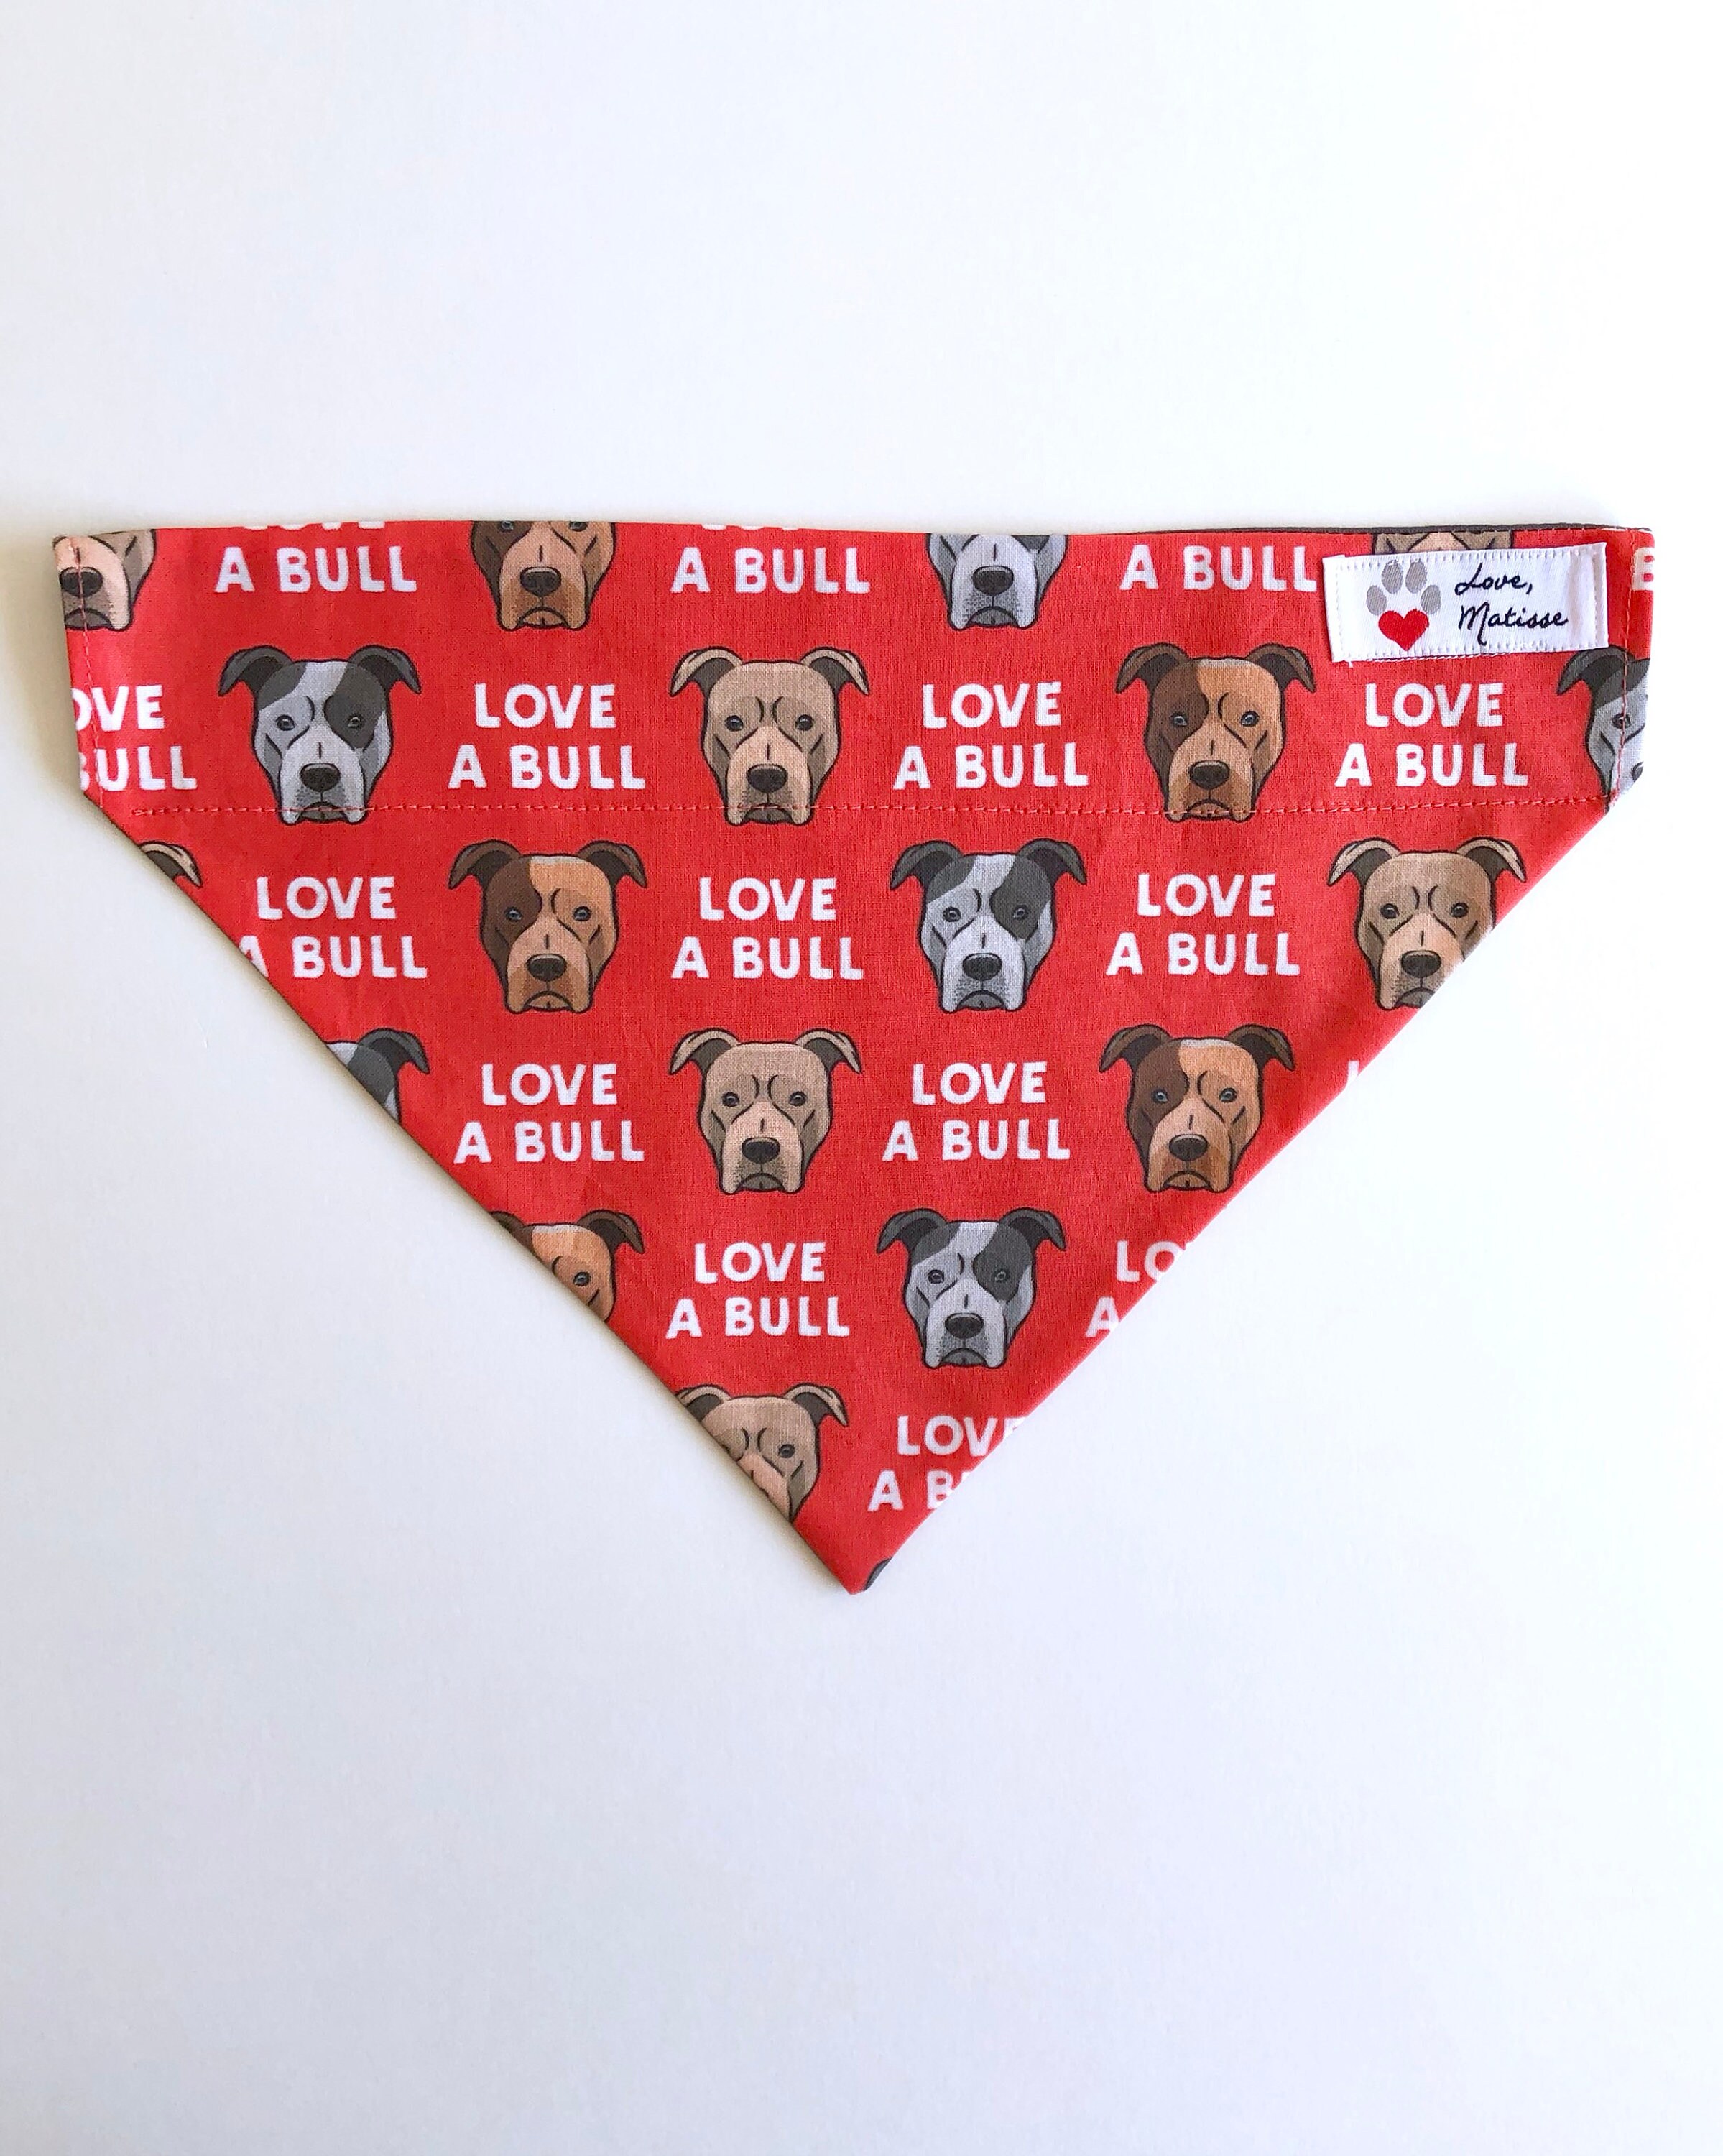 Over the Collar Red Pit Bull Dog Bandana. Love a Bully Breed | Etsy